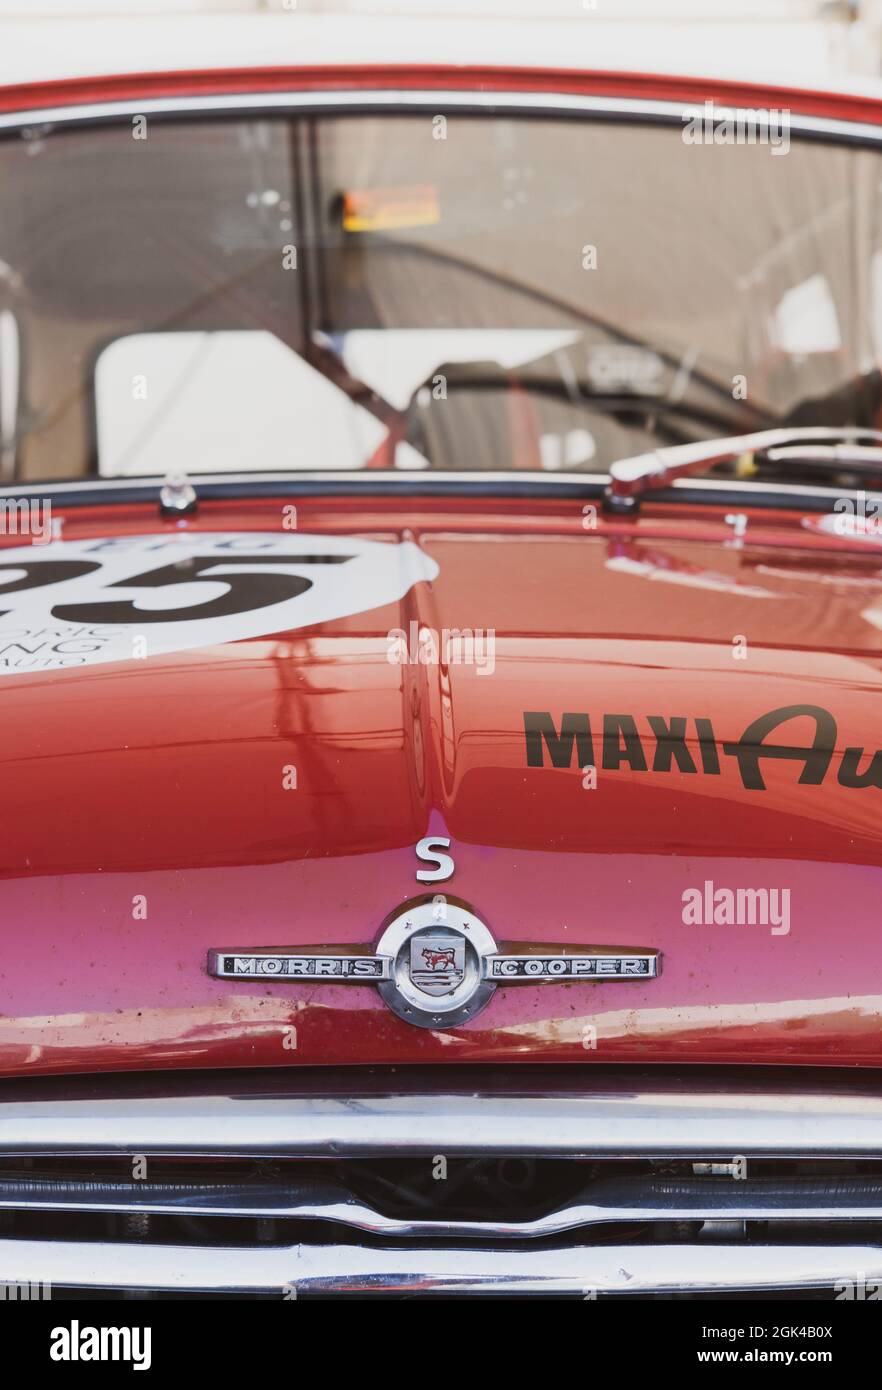 Italy, september 12 2021. Vallelunga classic. Austin Morris Mini Cooper racing vintage car hood detail with logo and name Stock Photo